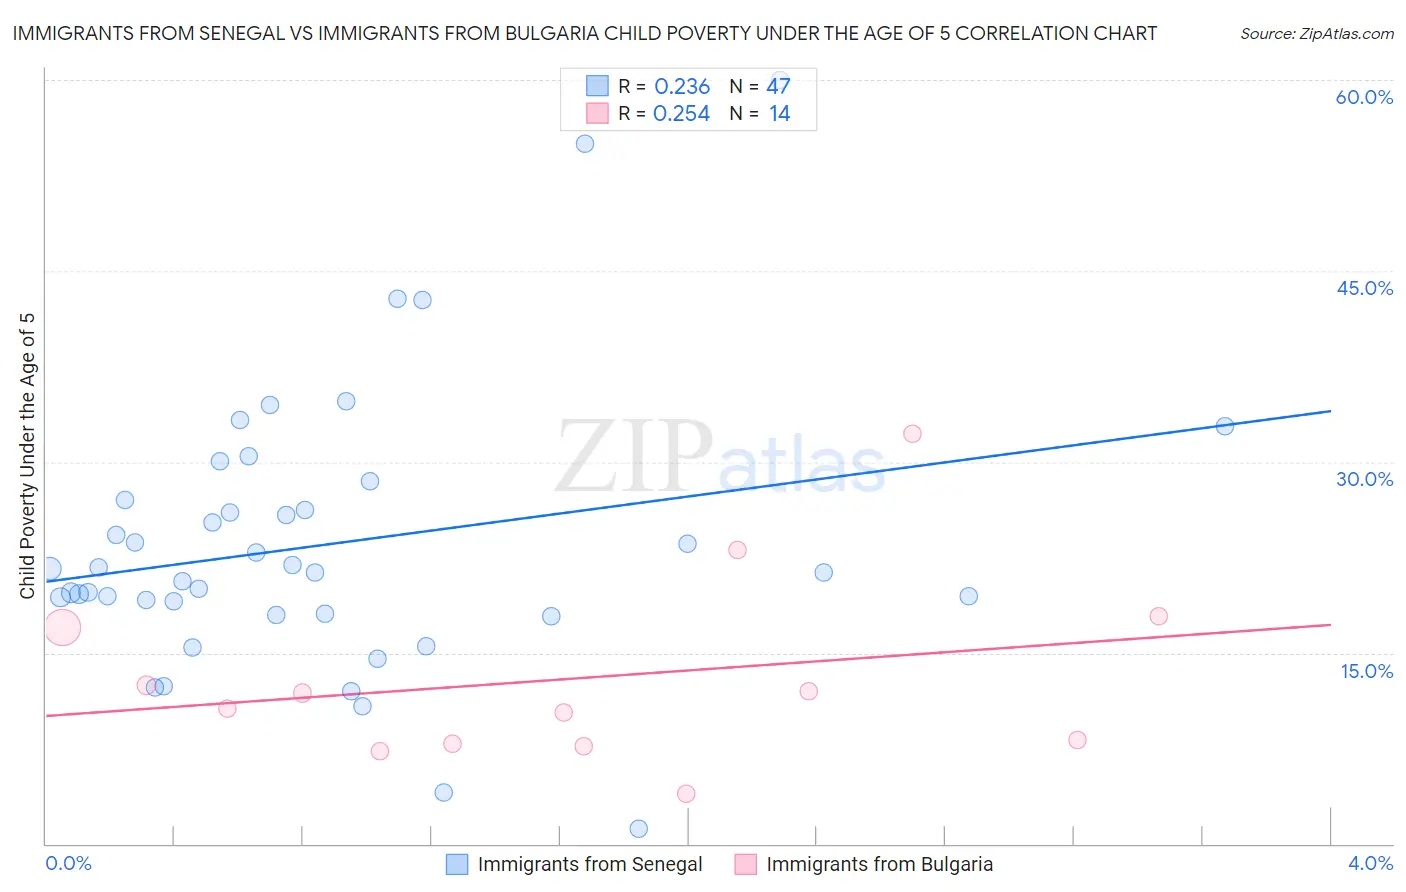 Immigrants from Senegal vs Immigrants from Bulgaria Child Poverty Under the Age of 5